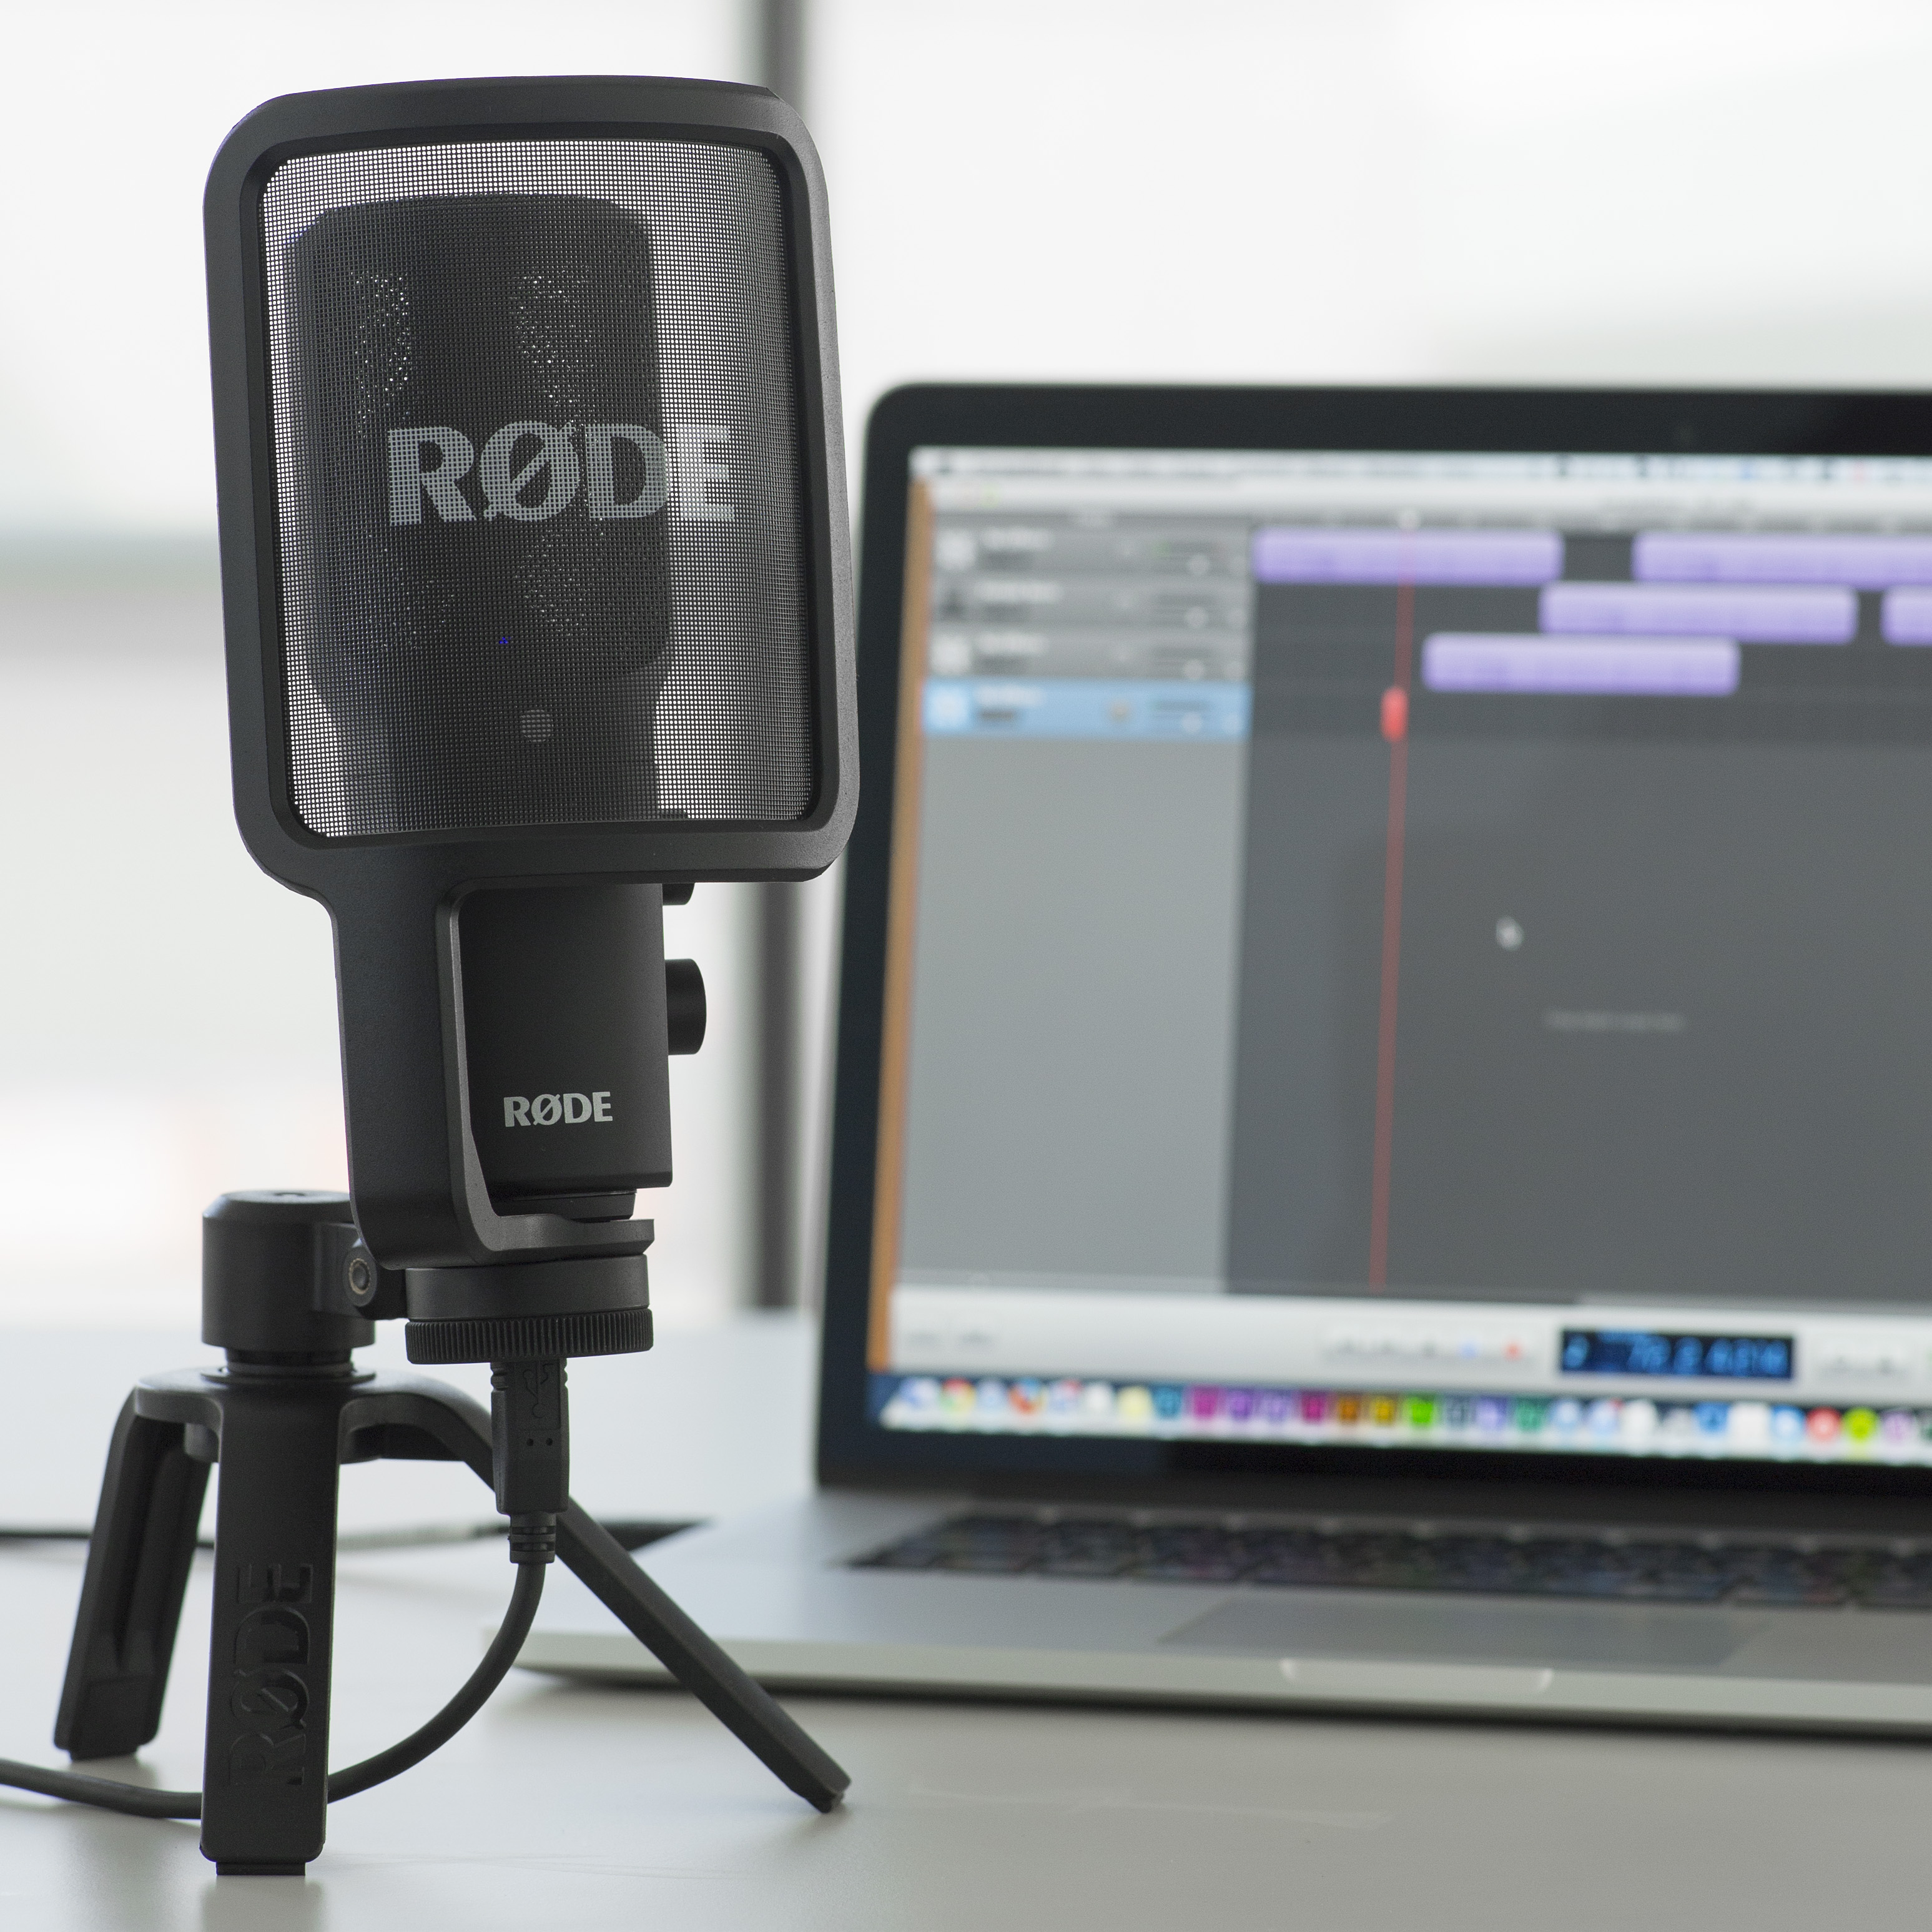 Enjoy Studio-quality recording on the go with the new RØDE NT-USB 22